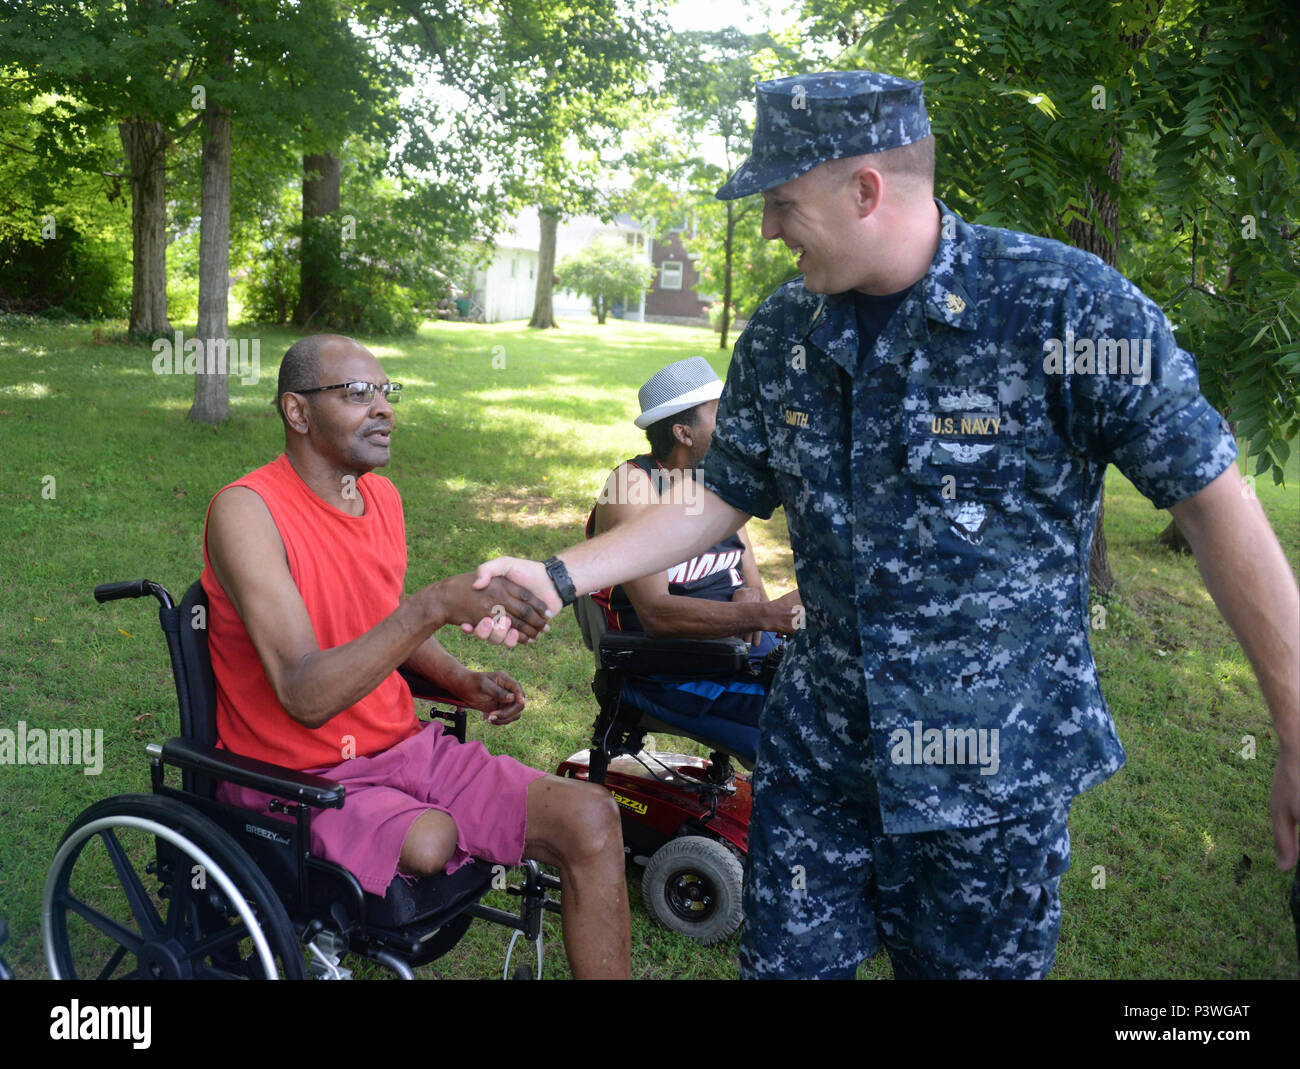 160722-N-FU443-027 NASHVILLE (July 22, 2016) Chief Electrician's Mate (Nuclear) Jeremy Smith congratulates a residents after an outdoor game where the residents attempted to sink paper battleships with squirt guns and water balloons at the Azalea Trace Assisted Living facility. Several members of Navy Recruiting District Nashville volunteered for the event in order to reach out to local members of the community. (U.S. Navy photo by Mass Communication Specialist 1st Class Timothy Walter/Released) Stock Photo